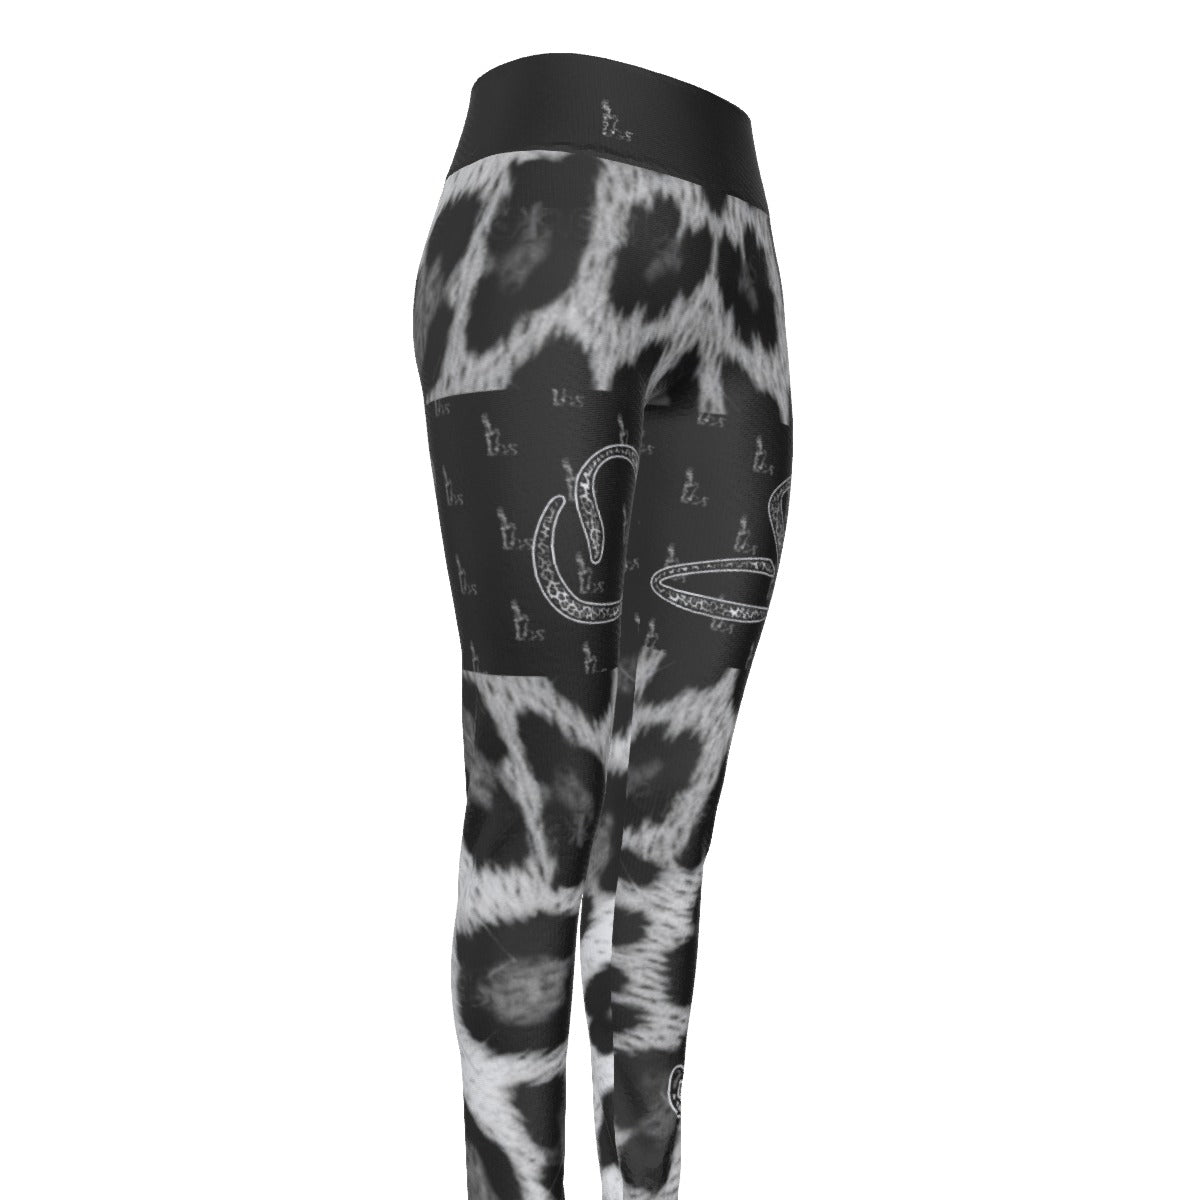 Officially Sexy Snow Leopard Print Collection Women's Black High Waist Thigh High Booty Popper Leggings #2 Front And Back (English) 2